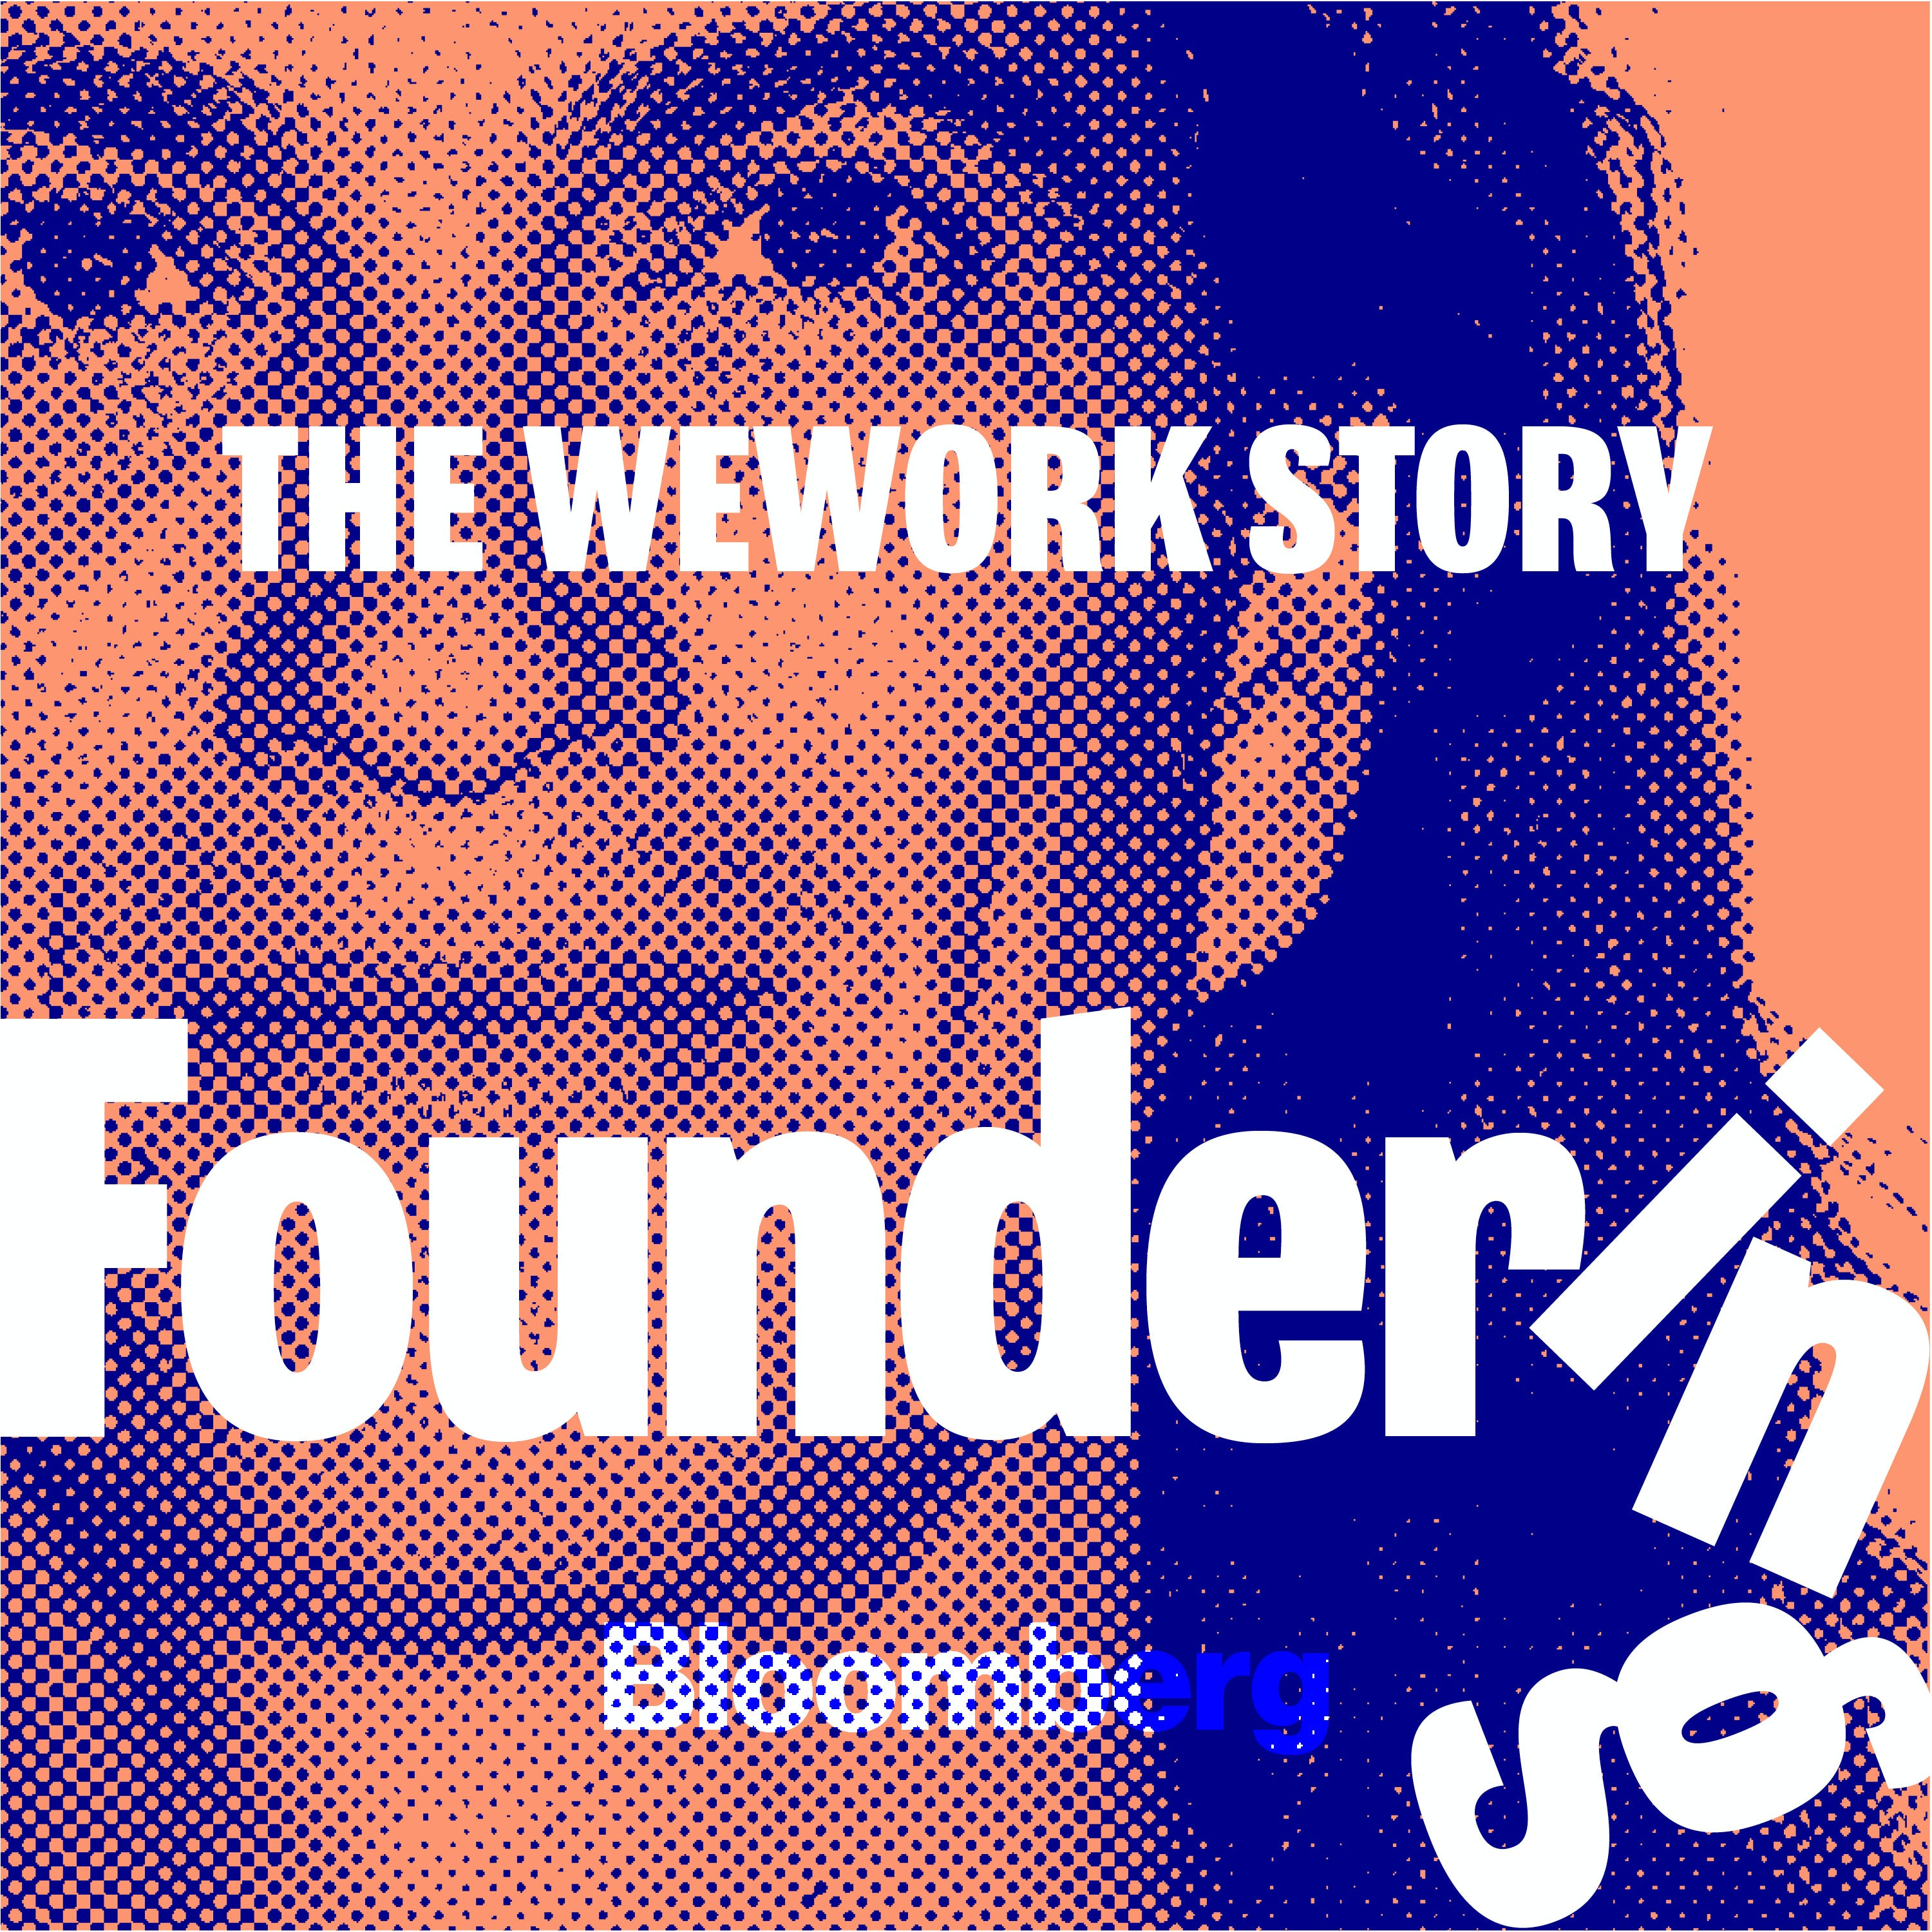 WeWork Part 5: The Universe Does Not Allow Waste